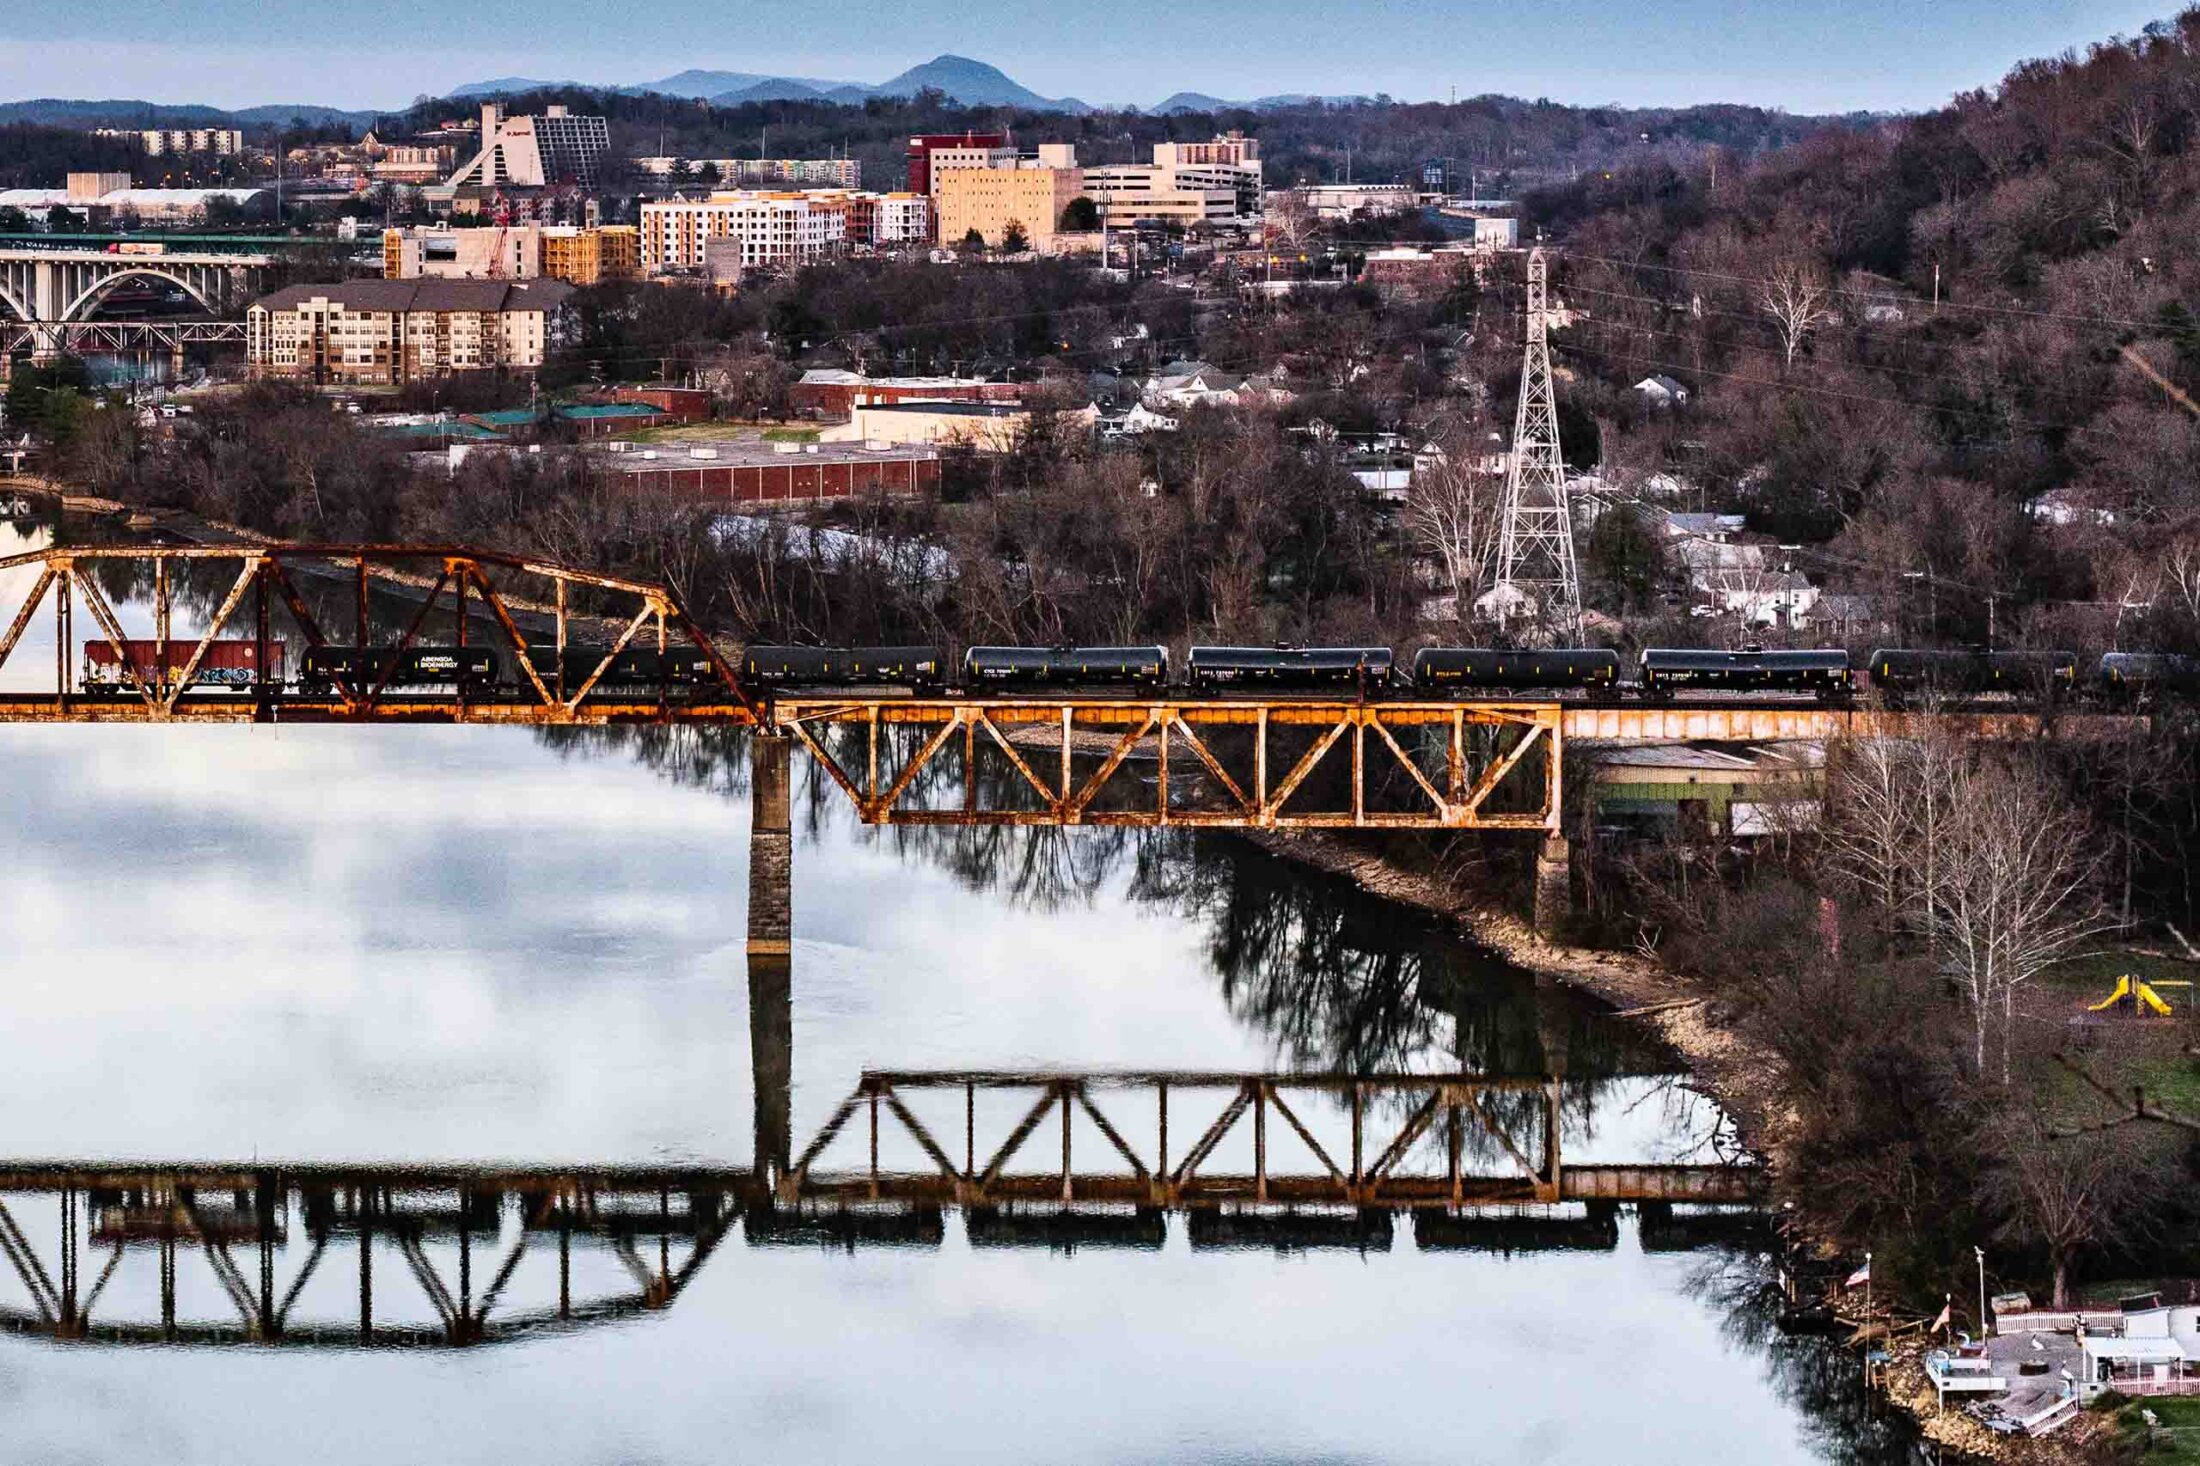 A train crosses the Tennessee River on a bridge with its reflection in the water.